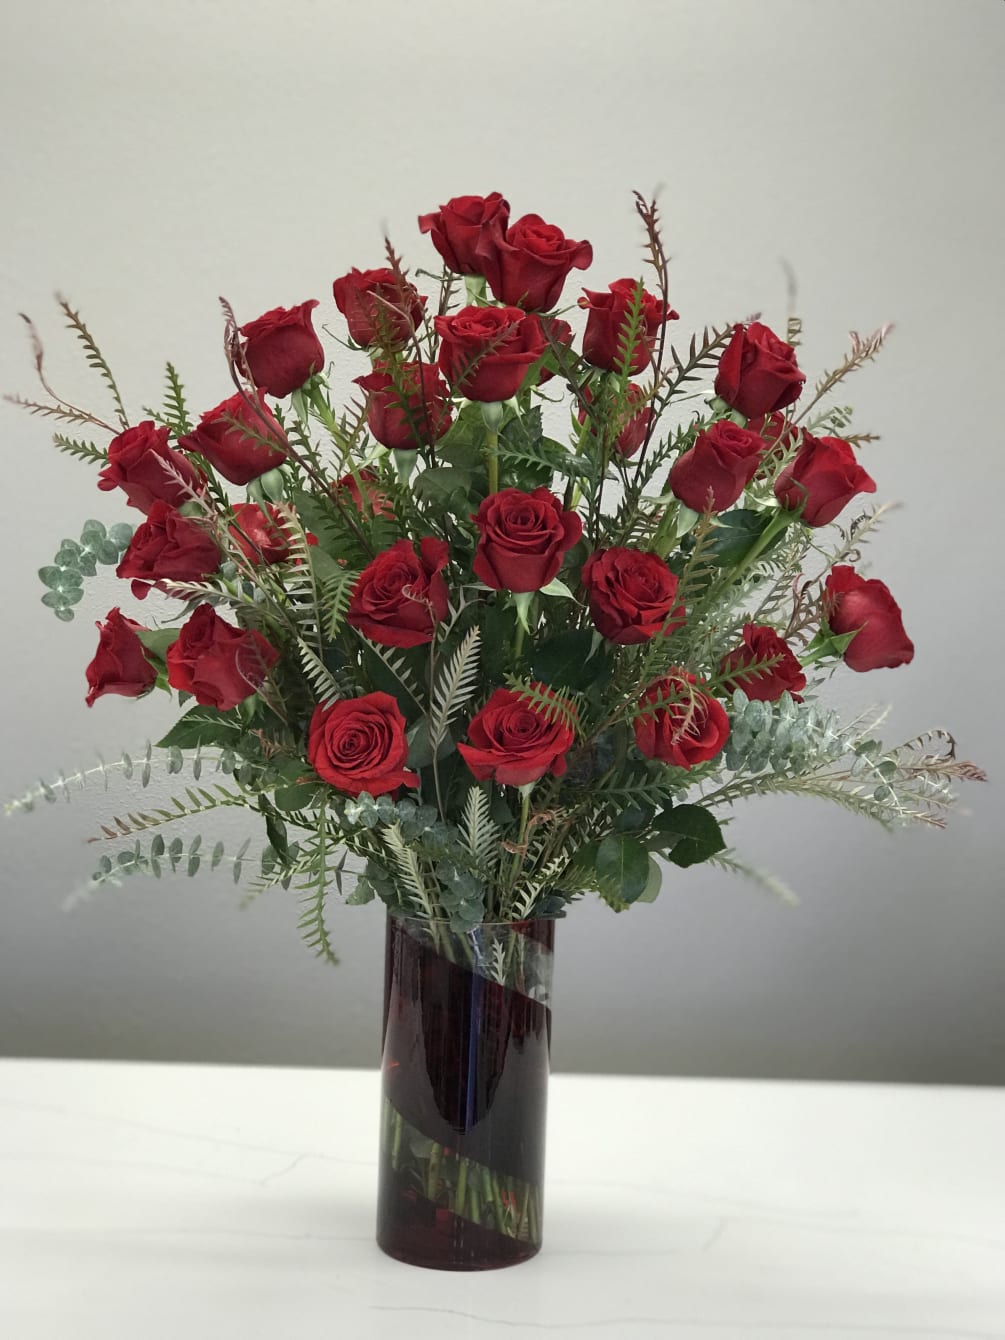 3 dozen long-stemmed red roses arranged in a tall red and clear